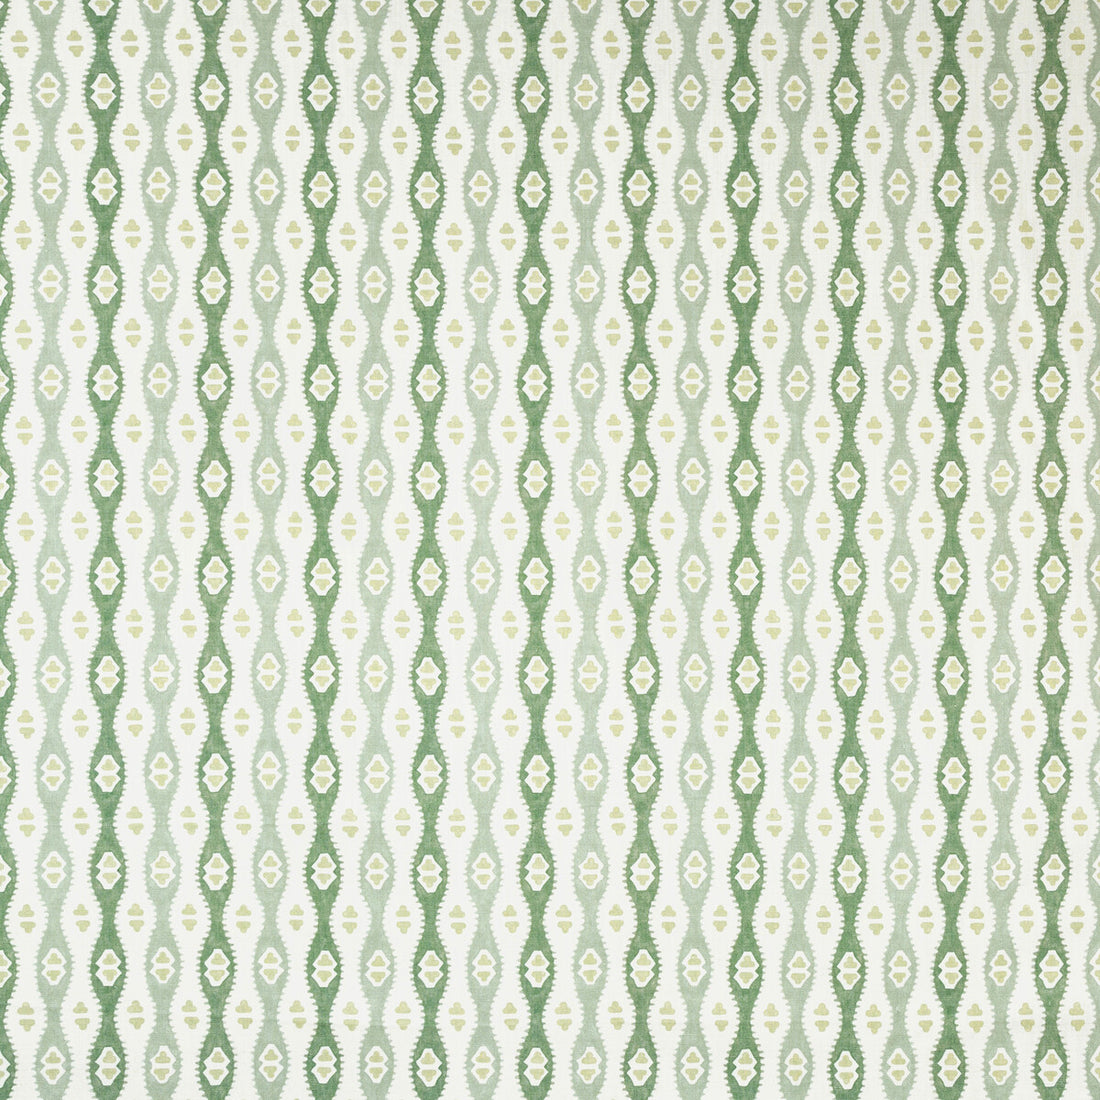 Elba Print fabric in jade color - pattern 2020187.23.0 - by Lee Jofa in the Avondale collection